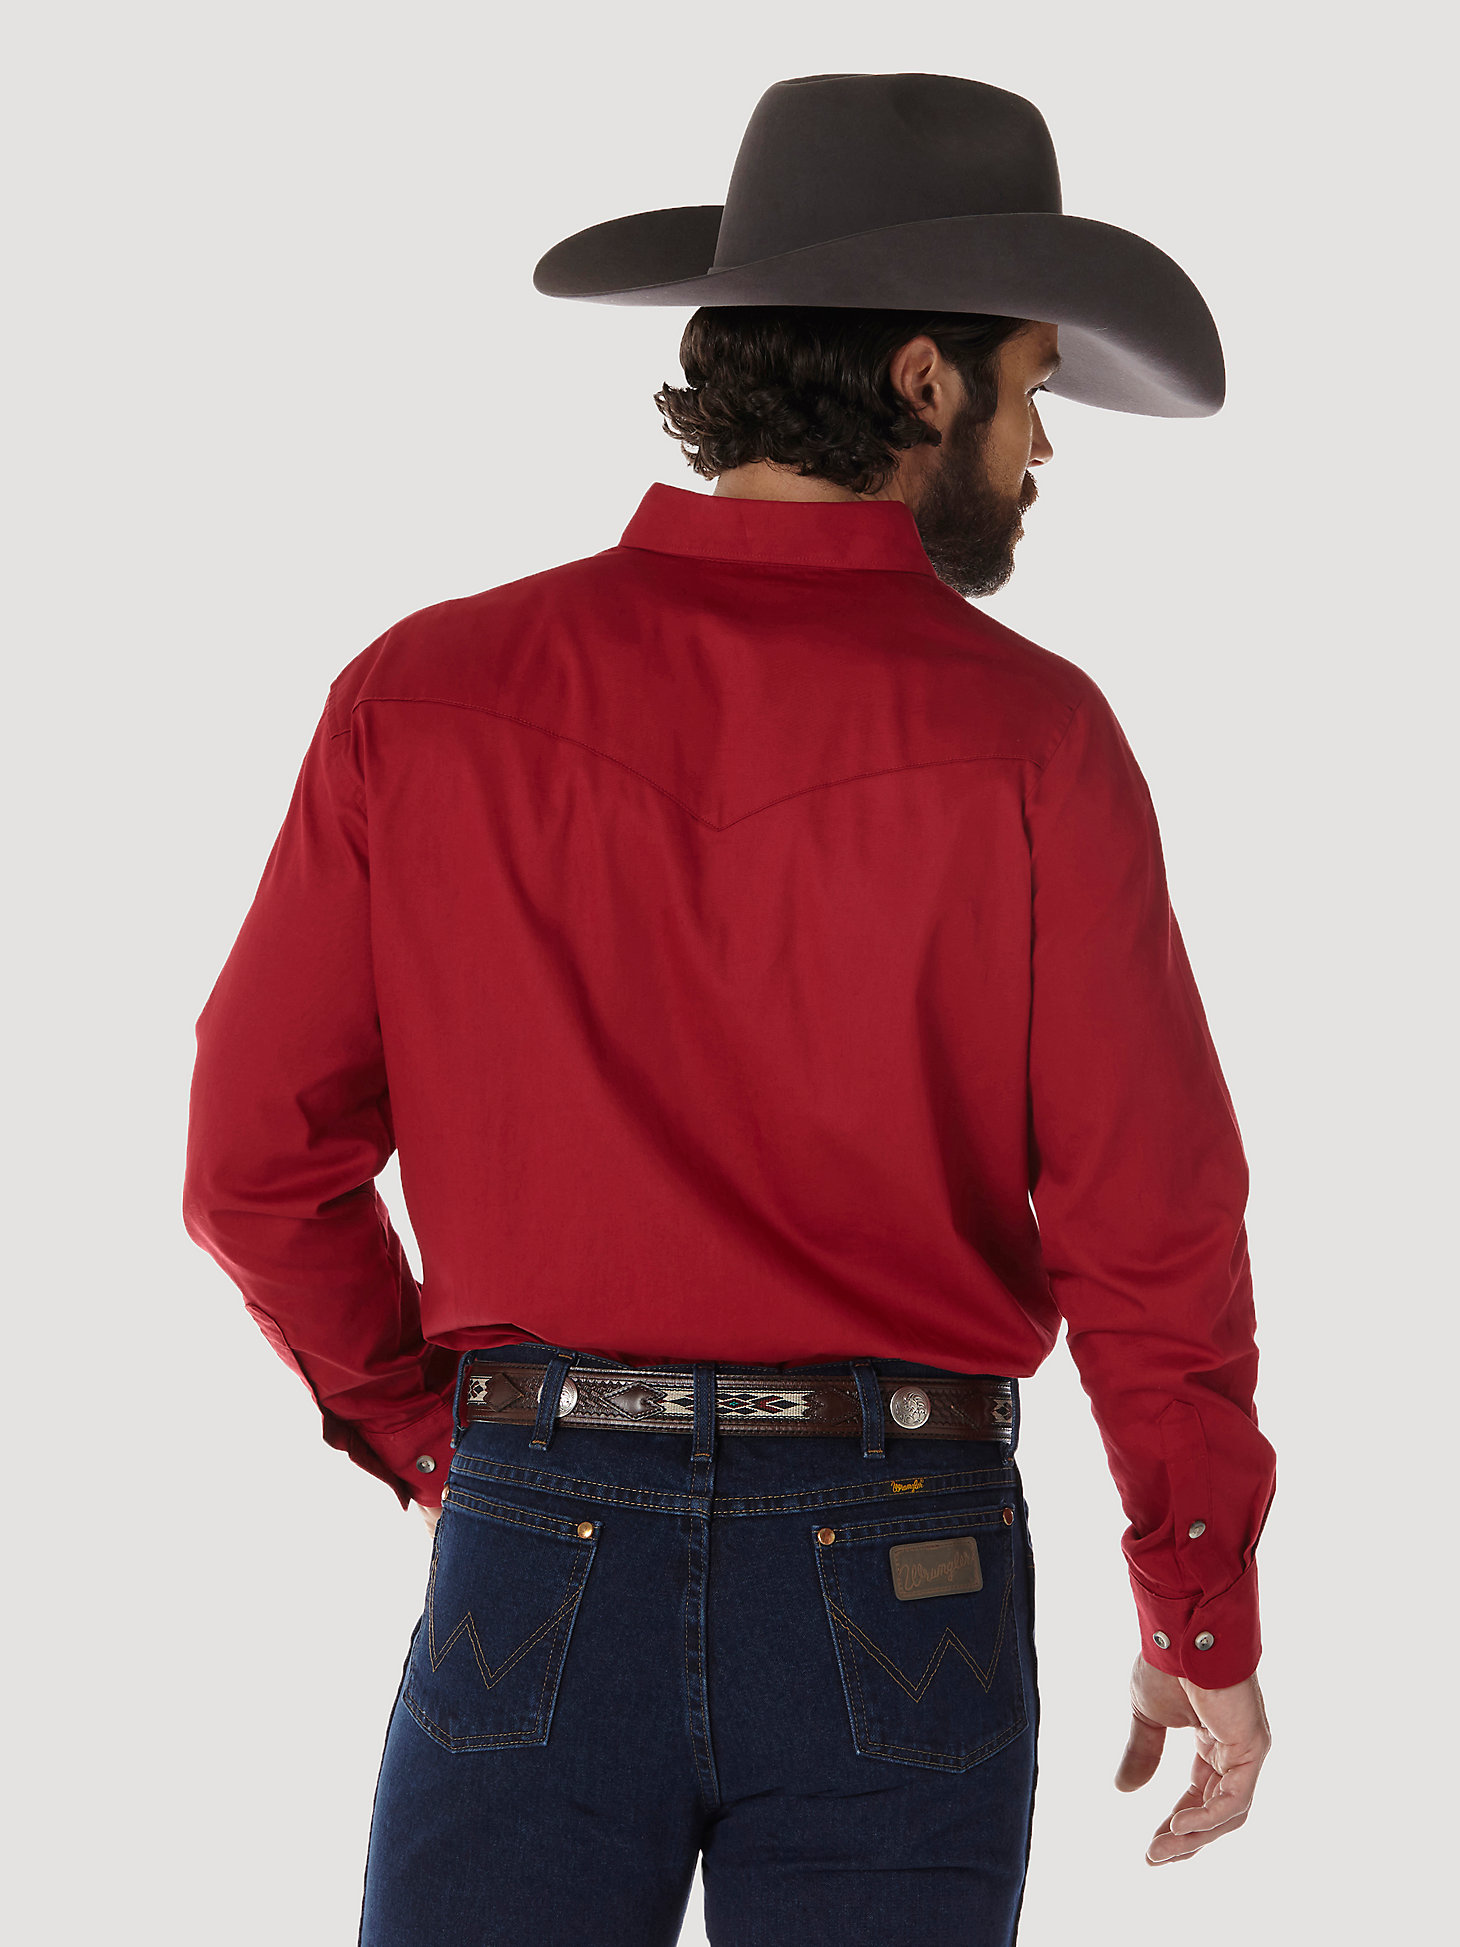 Painted Desert® Long Sleeve Button Down Lightweight Solid Twill Shirt in Red alternative view 1